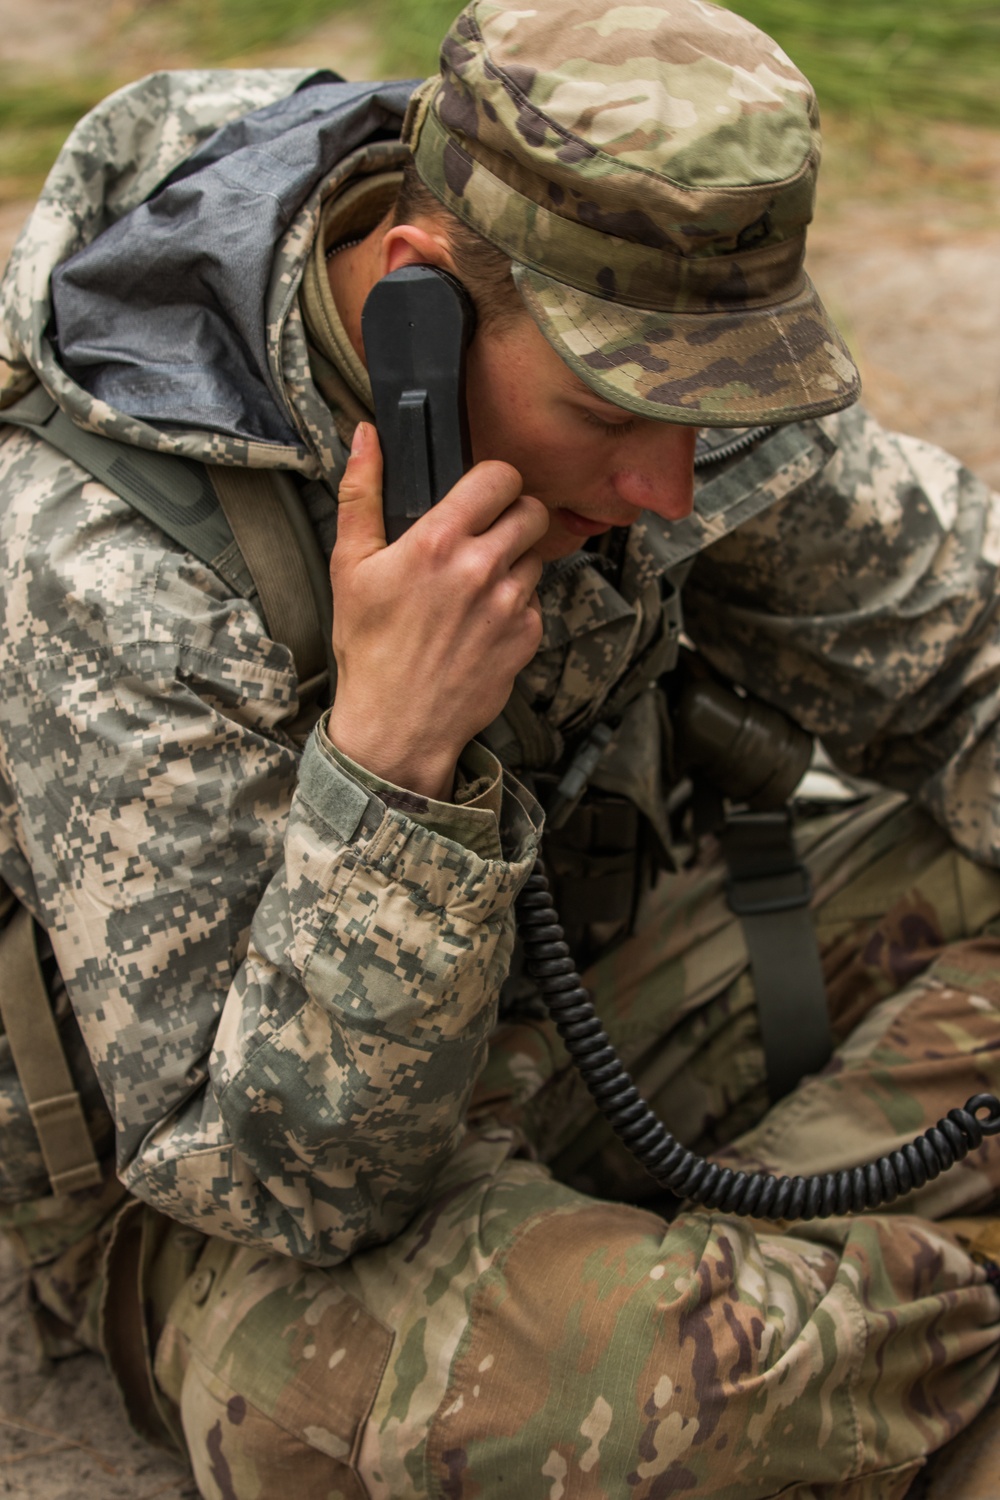 82nd Airborne Division hosts Expert Field Medical Badge Competition